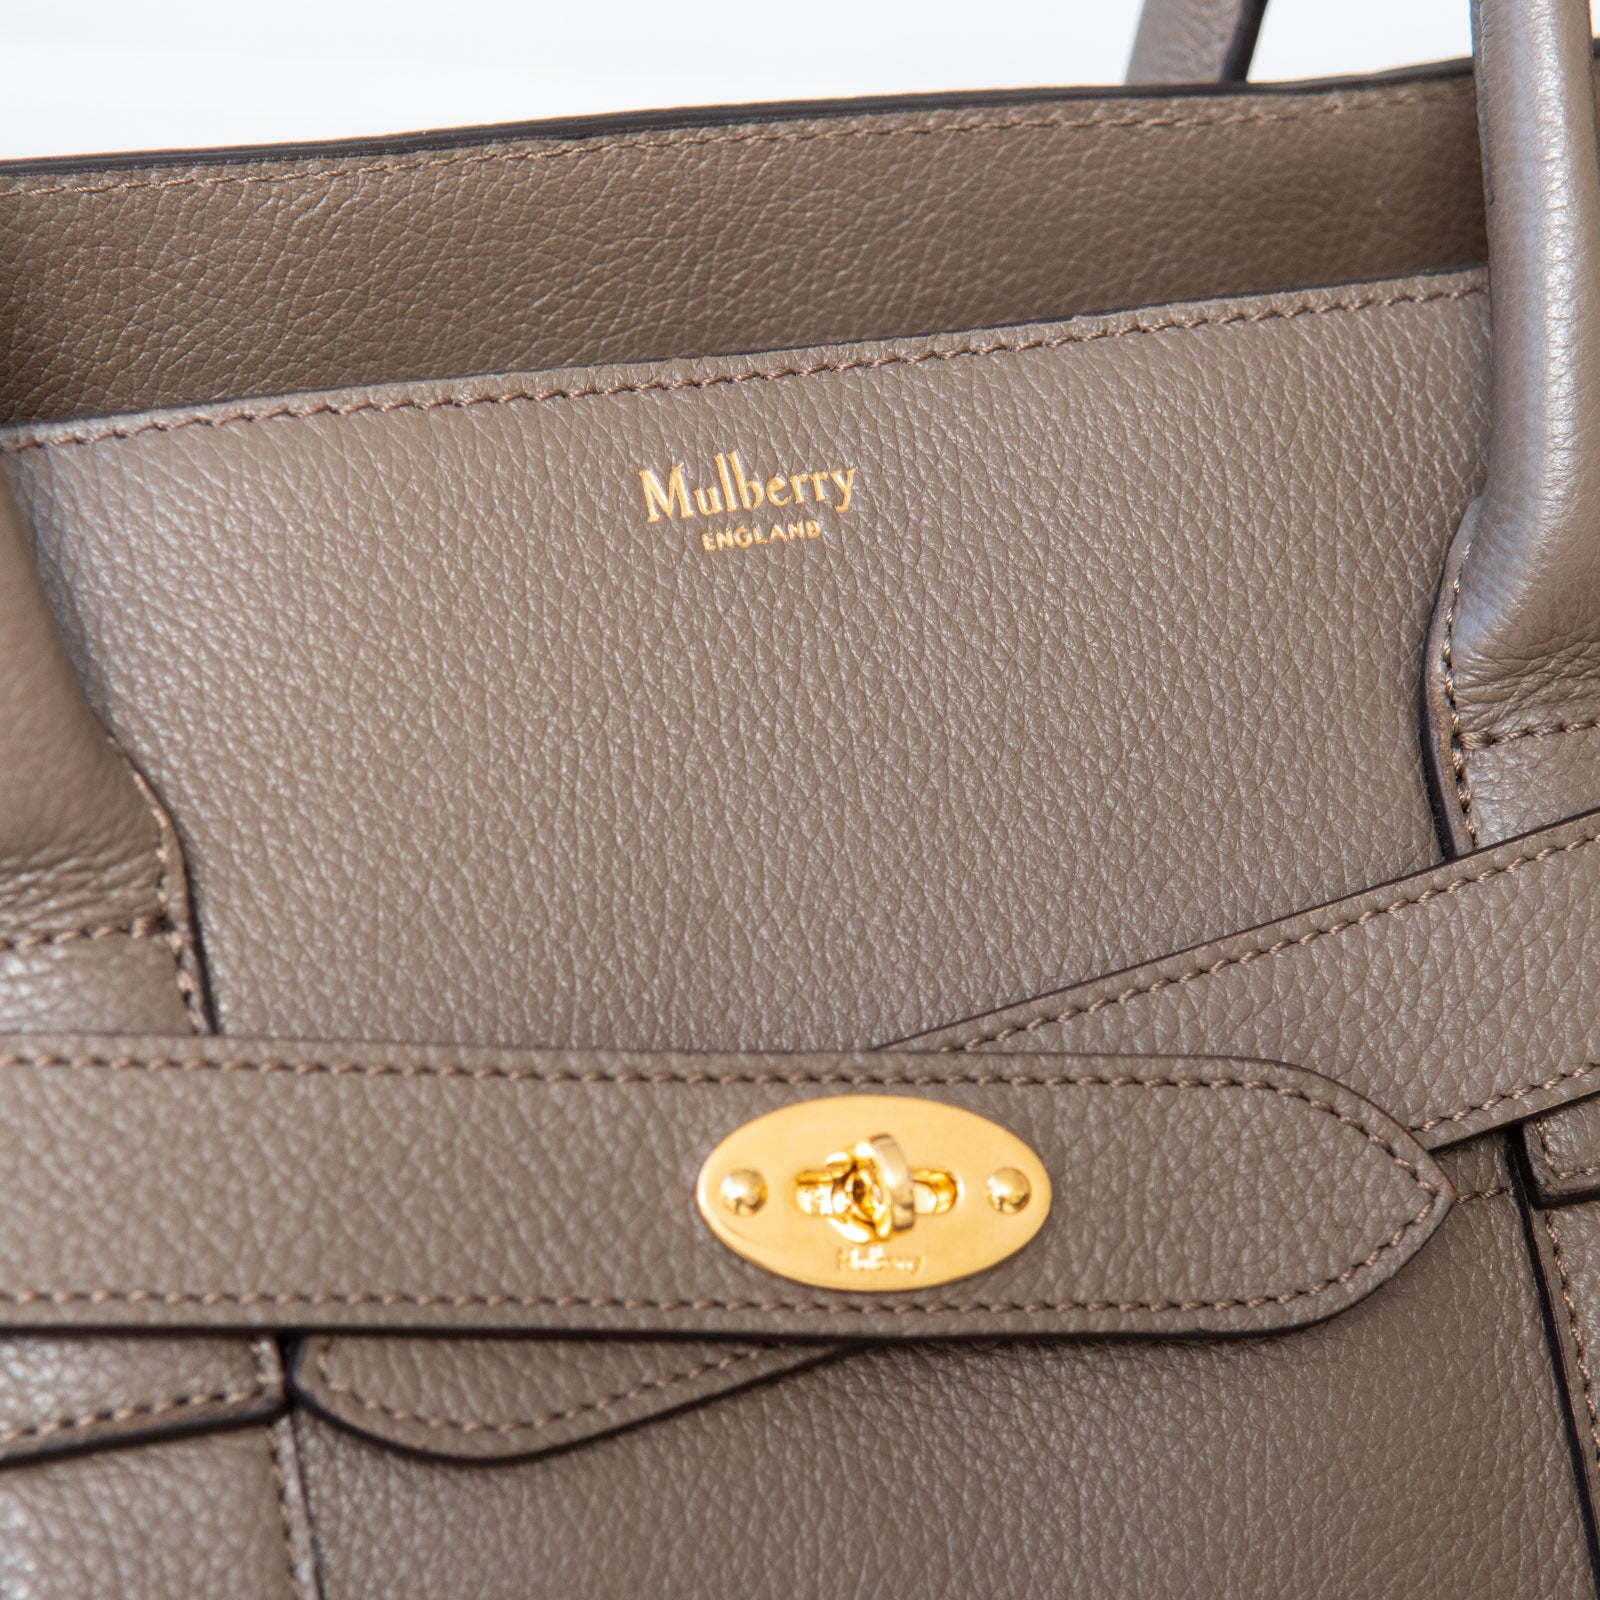 Mulberry Mushroom Zipped Bayswater Leather Bag - Image 4 of 10